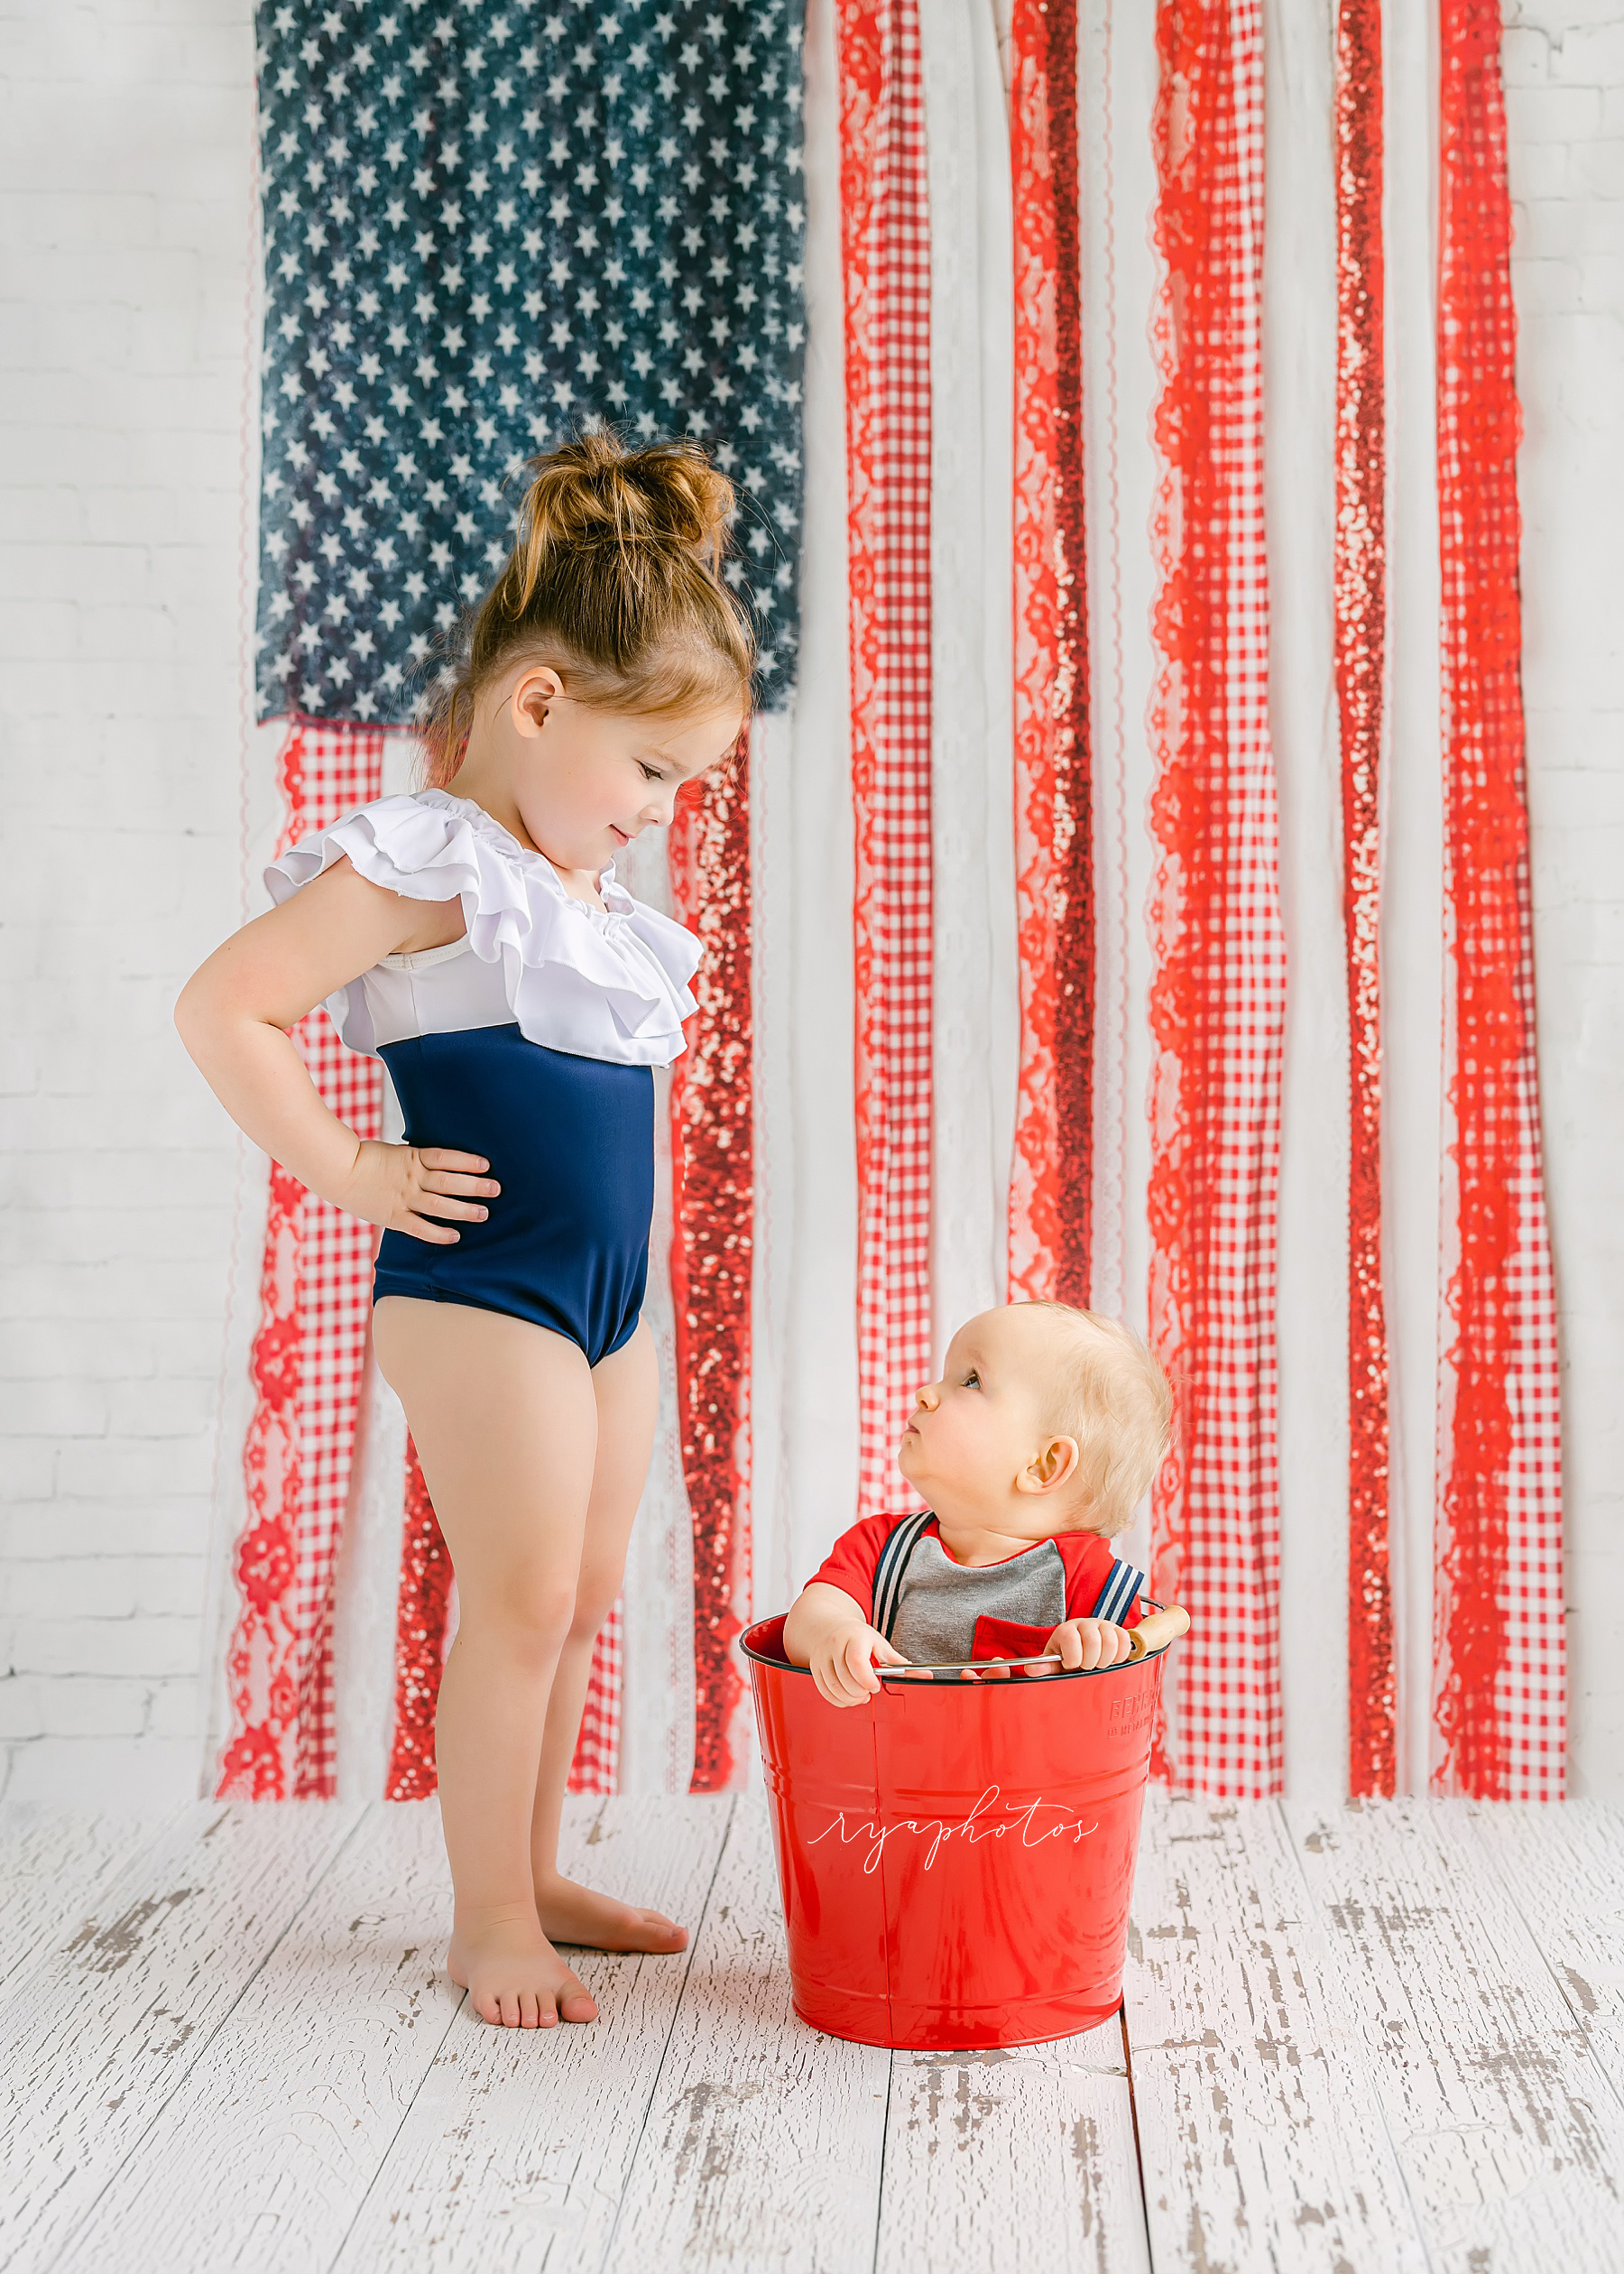 little girl standing in front of baby boy wearing blue and white bathing suit